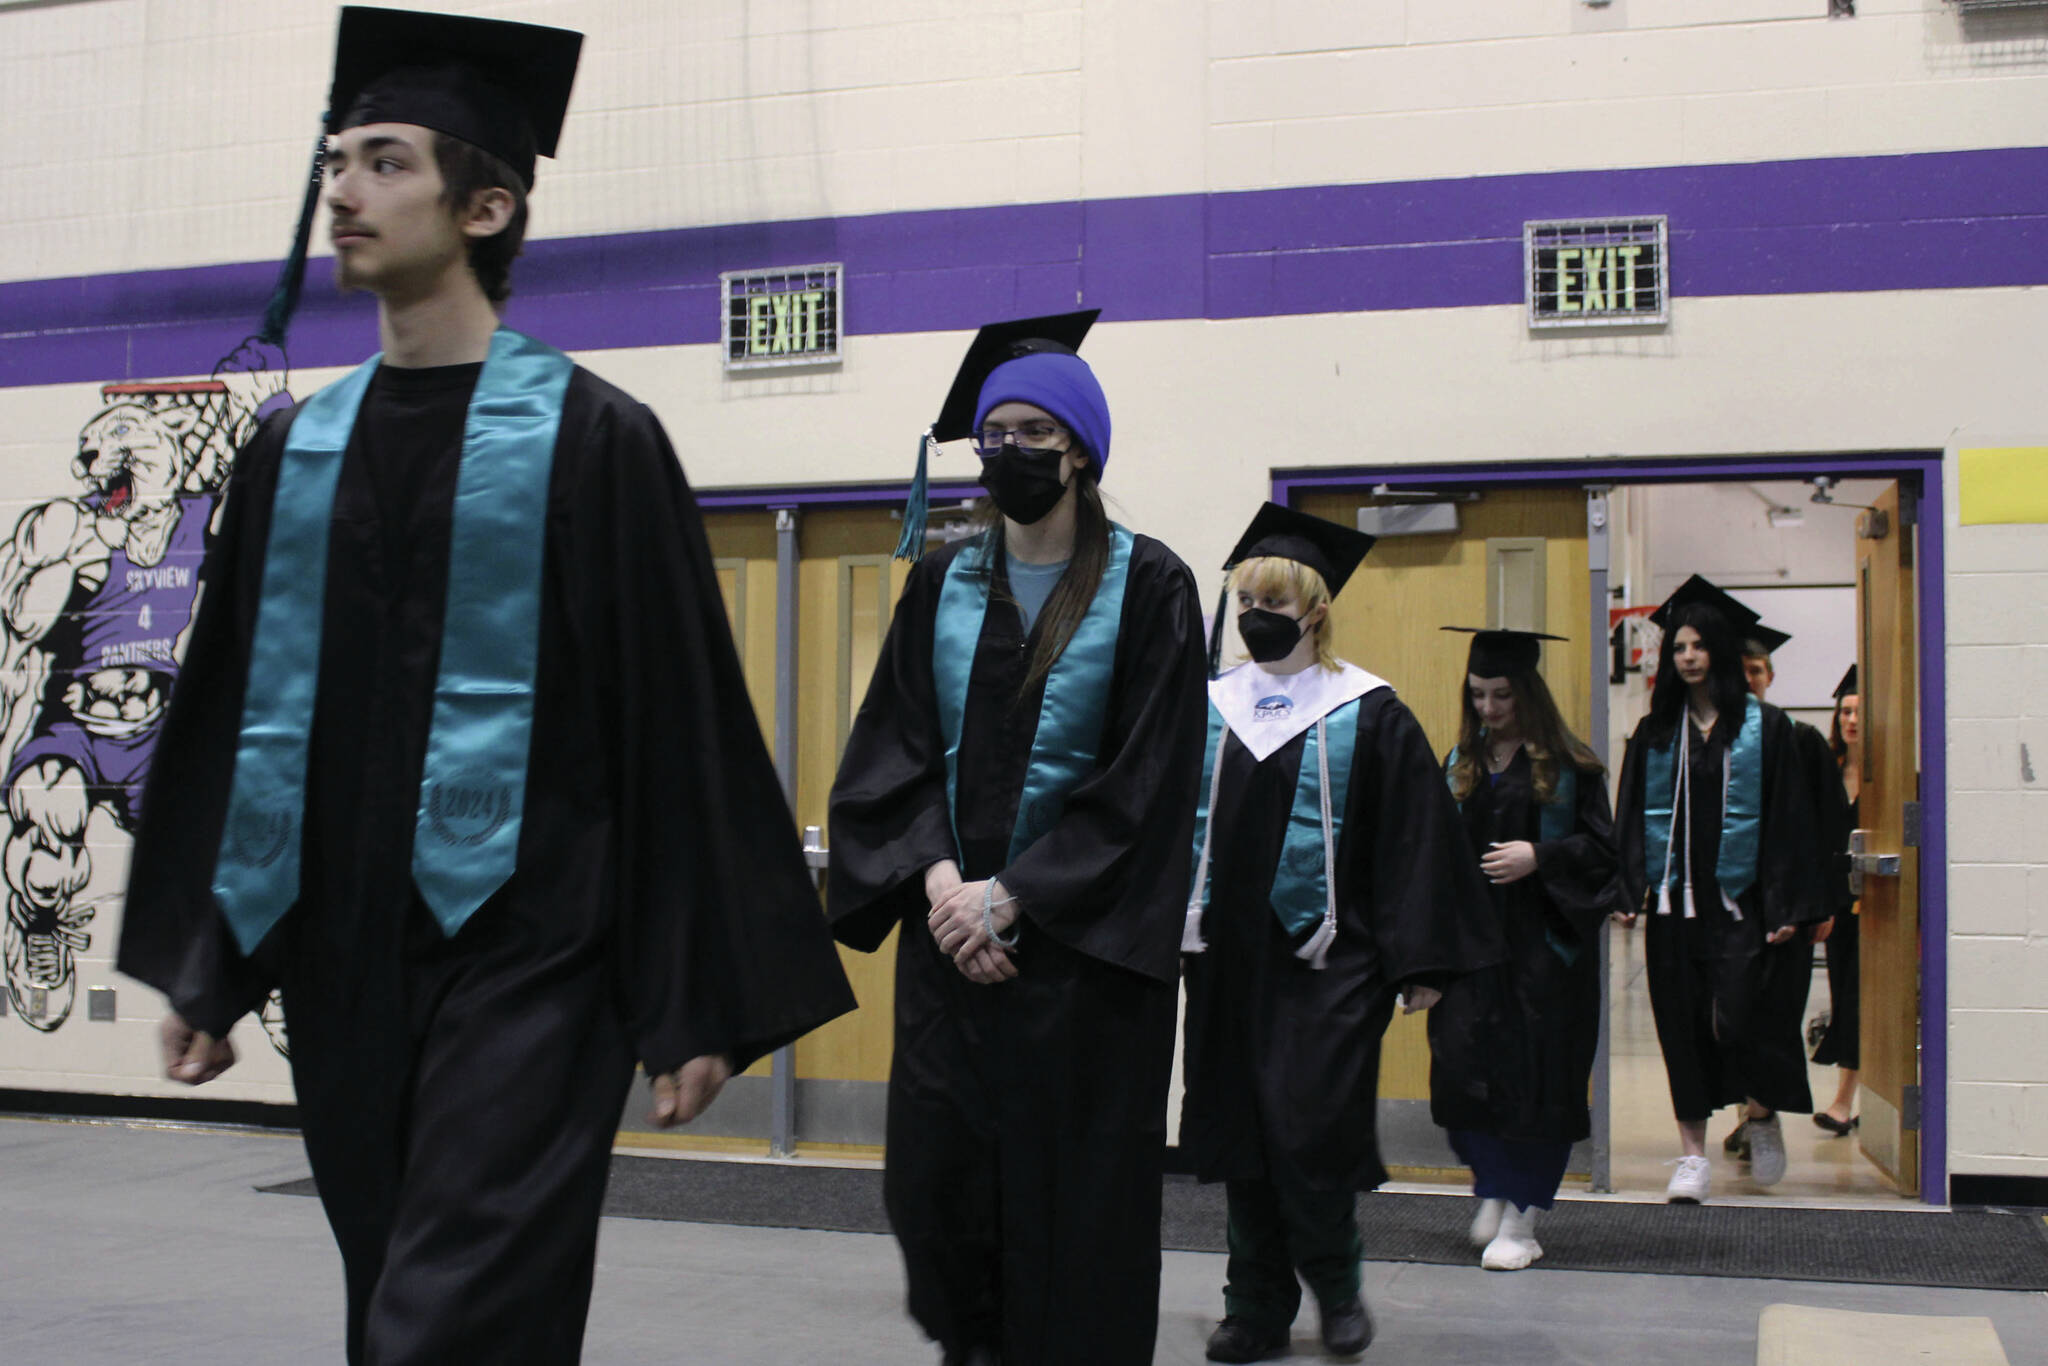 River City Academy graduates walk into Skyview Middle School’s gymnasium during their commencement ceremony on Monday near Soldotna. (Ashlyn O’Hara/Peninsula Clarion)